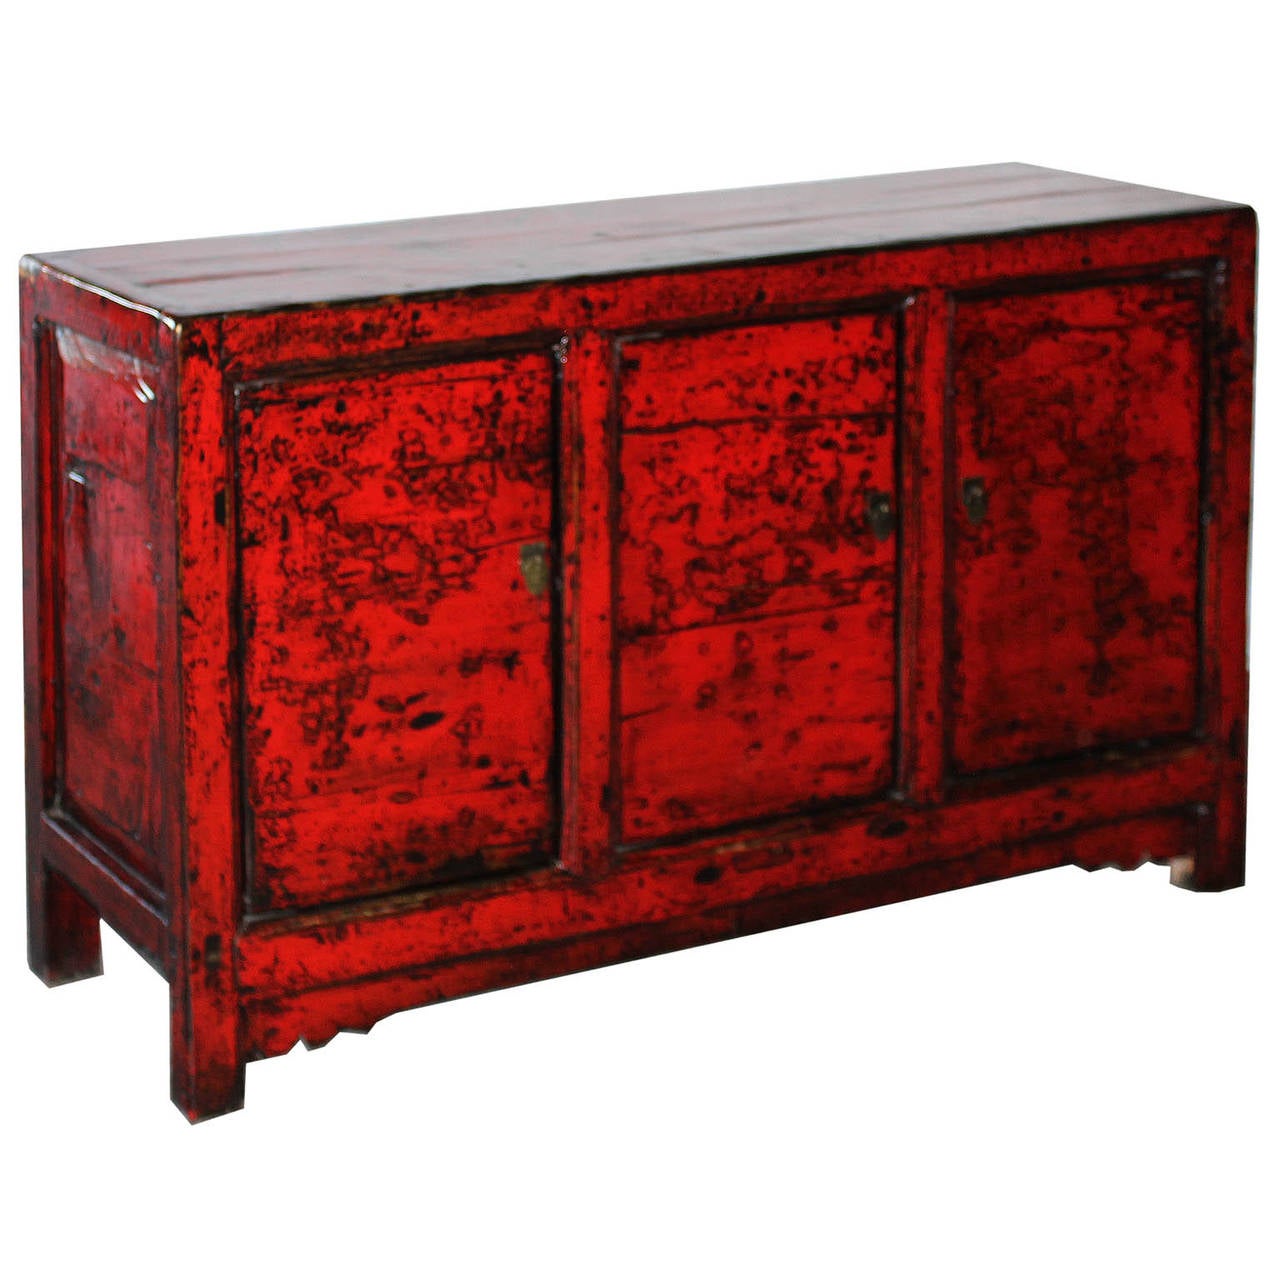 Three-door vintage sideboard with carved bottom skirt and exposed wood edges add a pop of color in the living or dining room in a contemporary interior. New interior shelf and hardware. Gansu, China, circa 1890s.